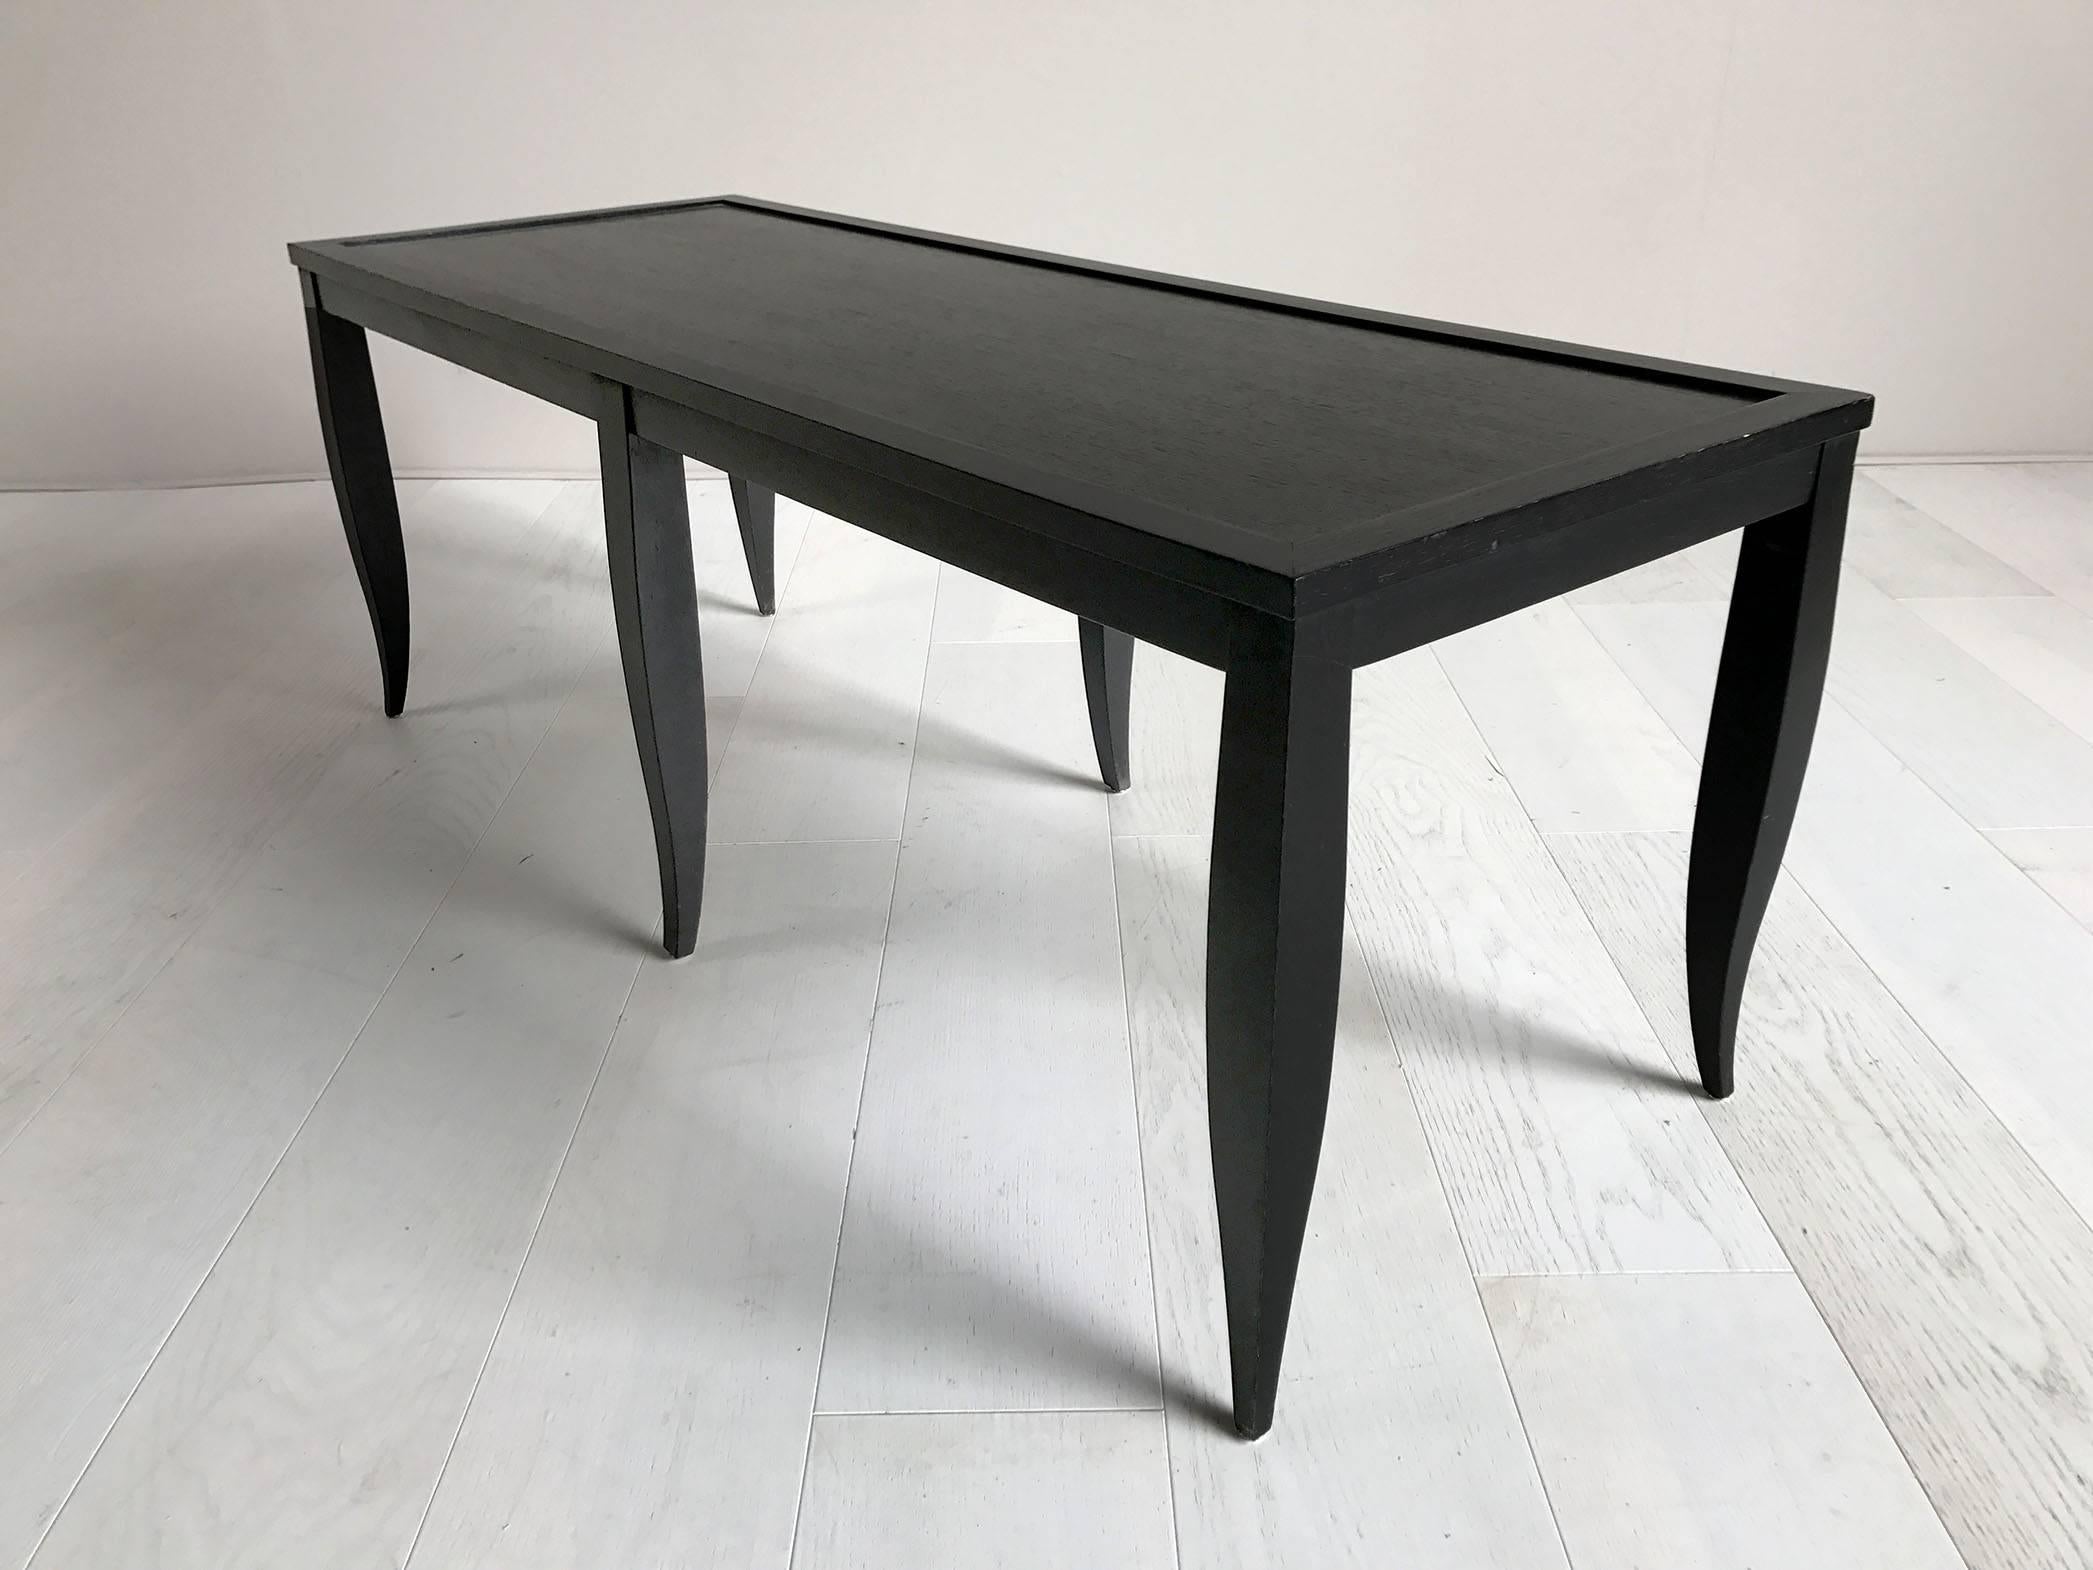 Table/bench with 6 legs in blackened oak Les Amants by Philippe Delzers for Elitis, France, 1998. Exemplary n ° 0, in this version with wooden plate, three benches were published.
Provenance: Personal collection of Philippe Delzers.